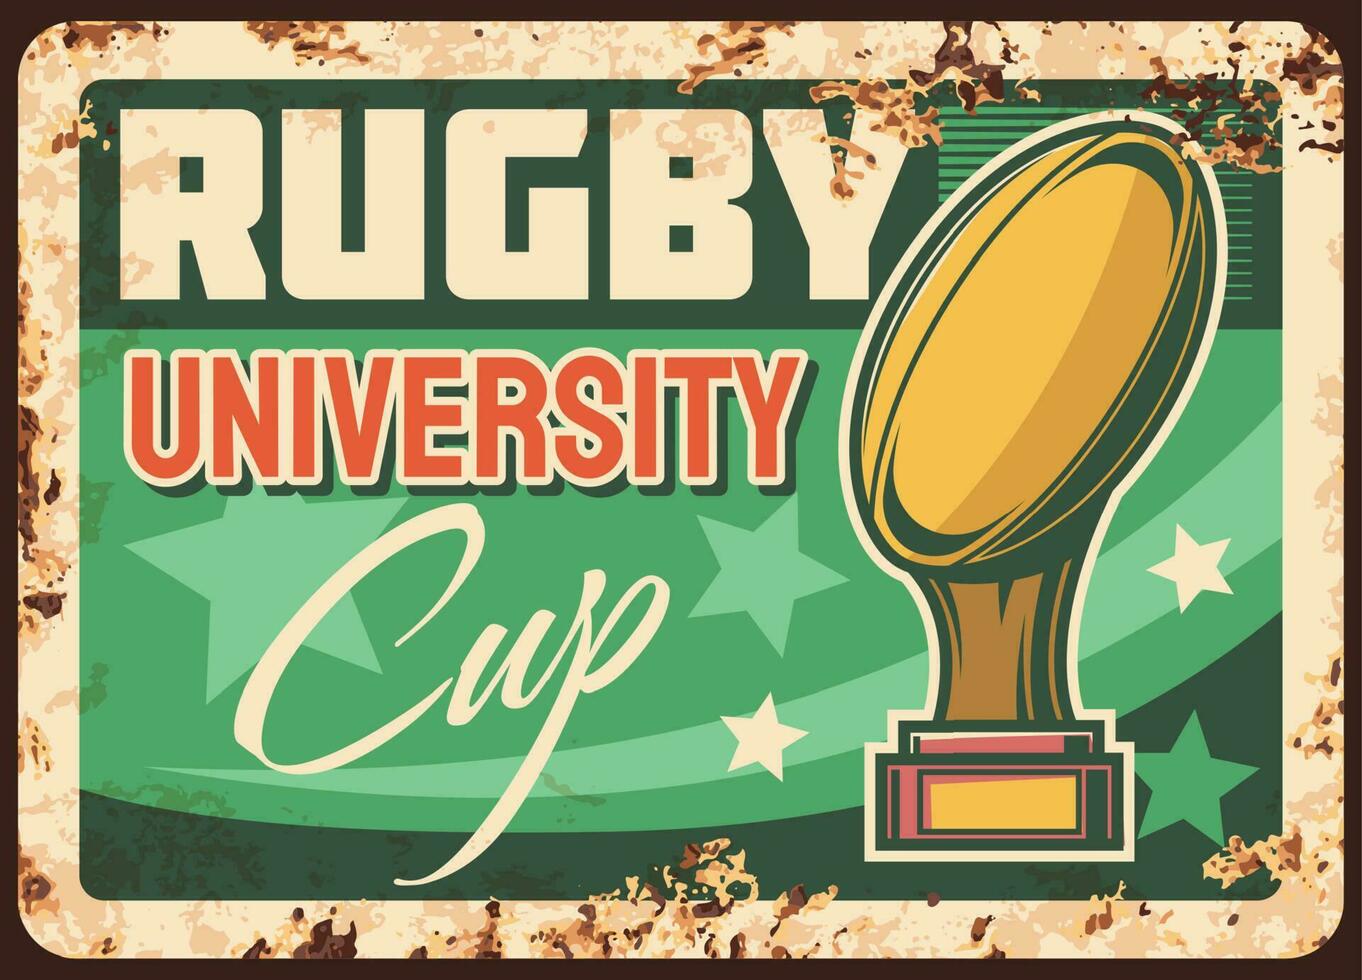 University rugby cup rusty metal vector plate